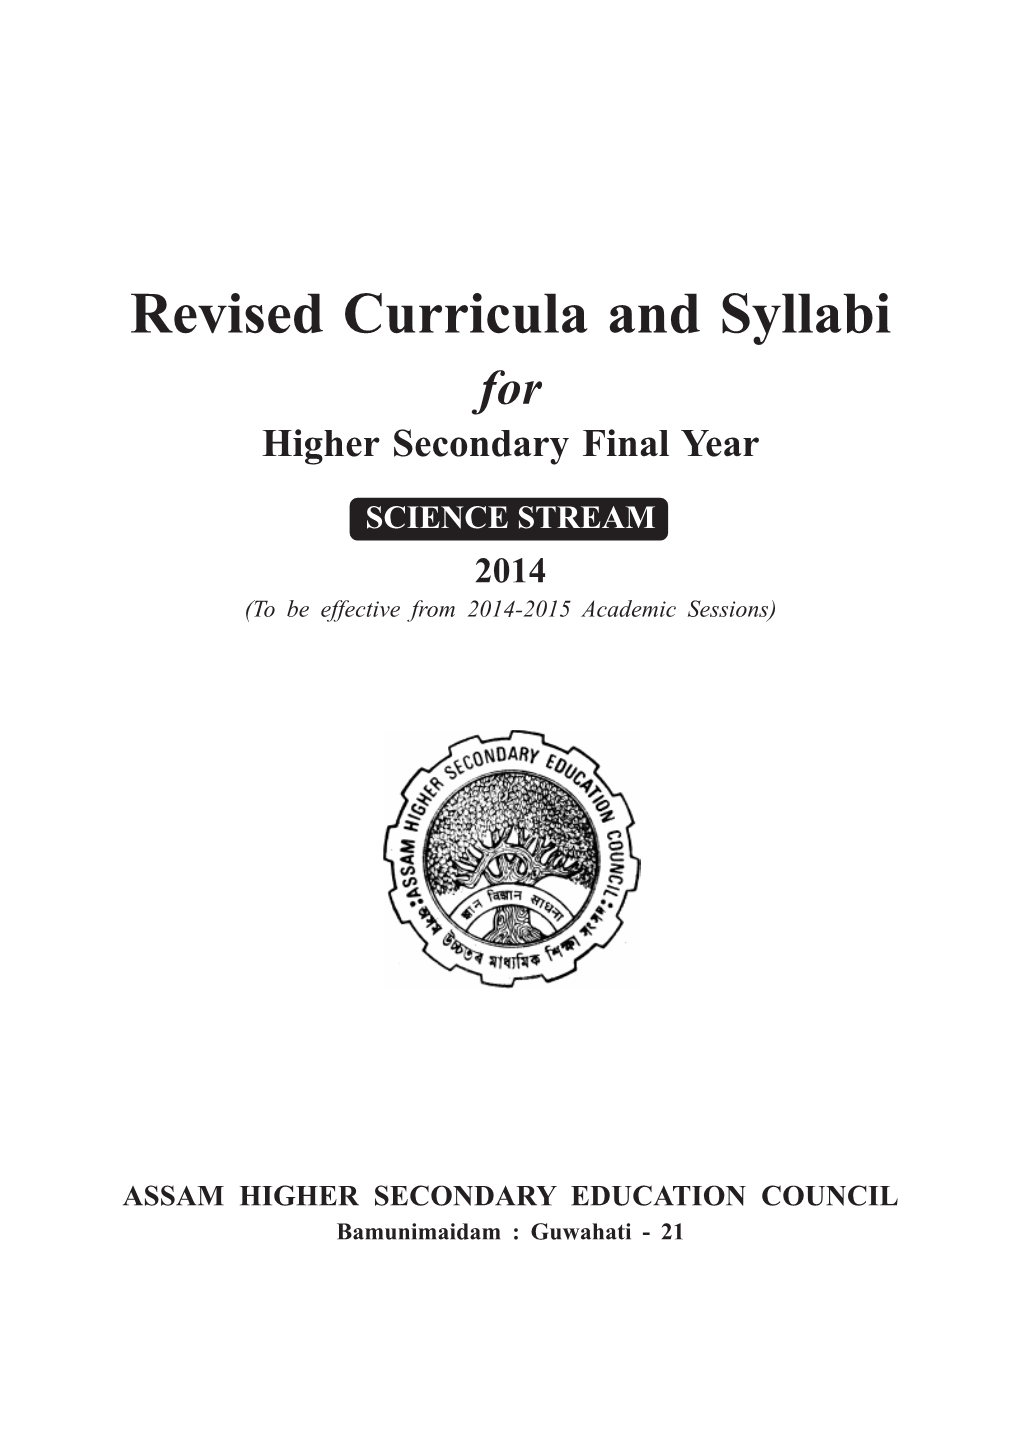 Revised Curricula and Syllabi for Higher Secondary Final Year